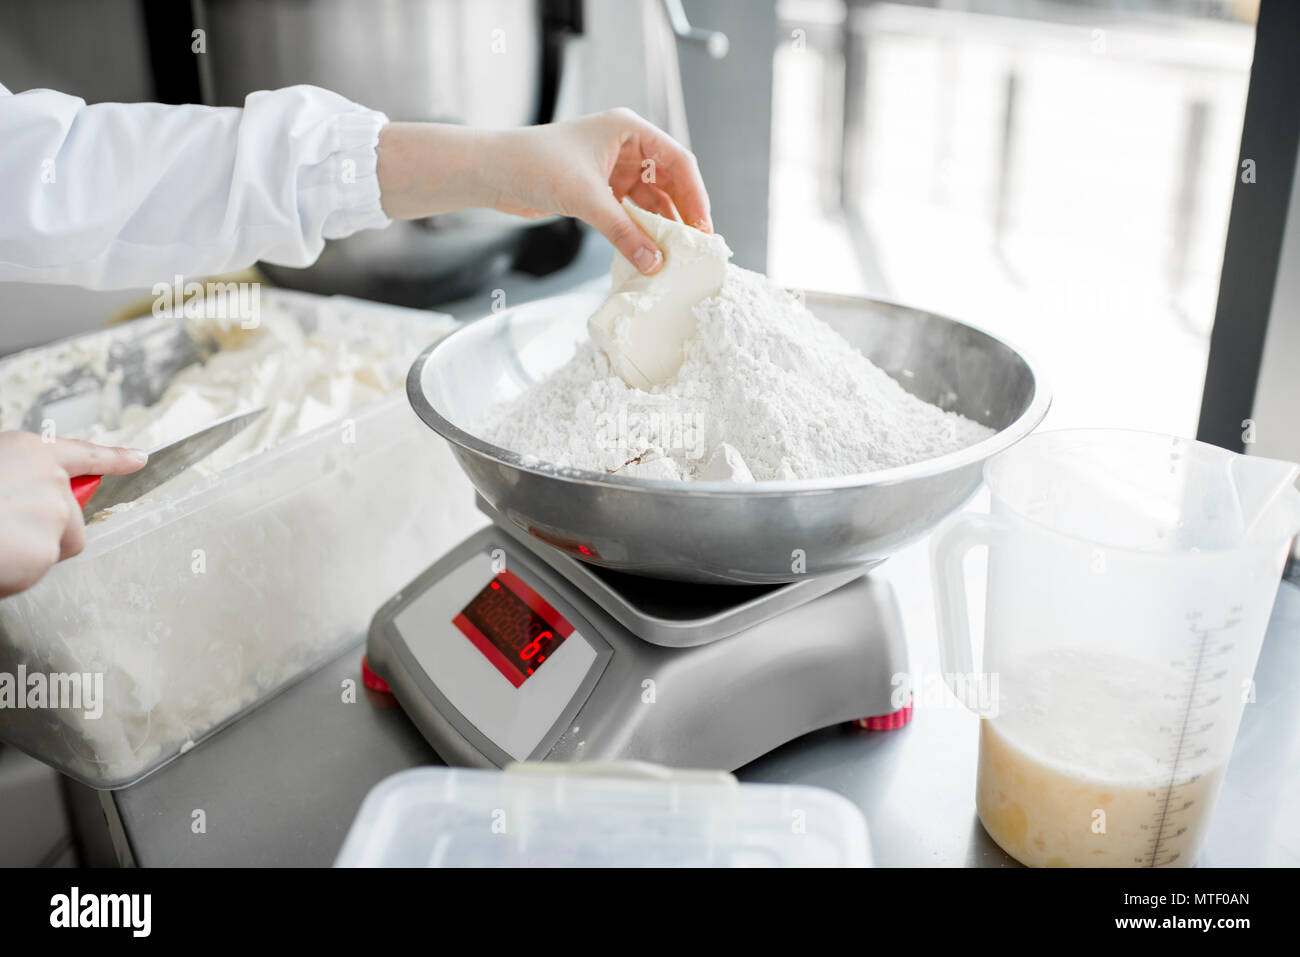 https://c8.alamy.com/comp/MTF0AN/weighing-flour-for-baking-with-professional-scales-at-the-manufacturing-close-up-view-MTF0AN.jpg